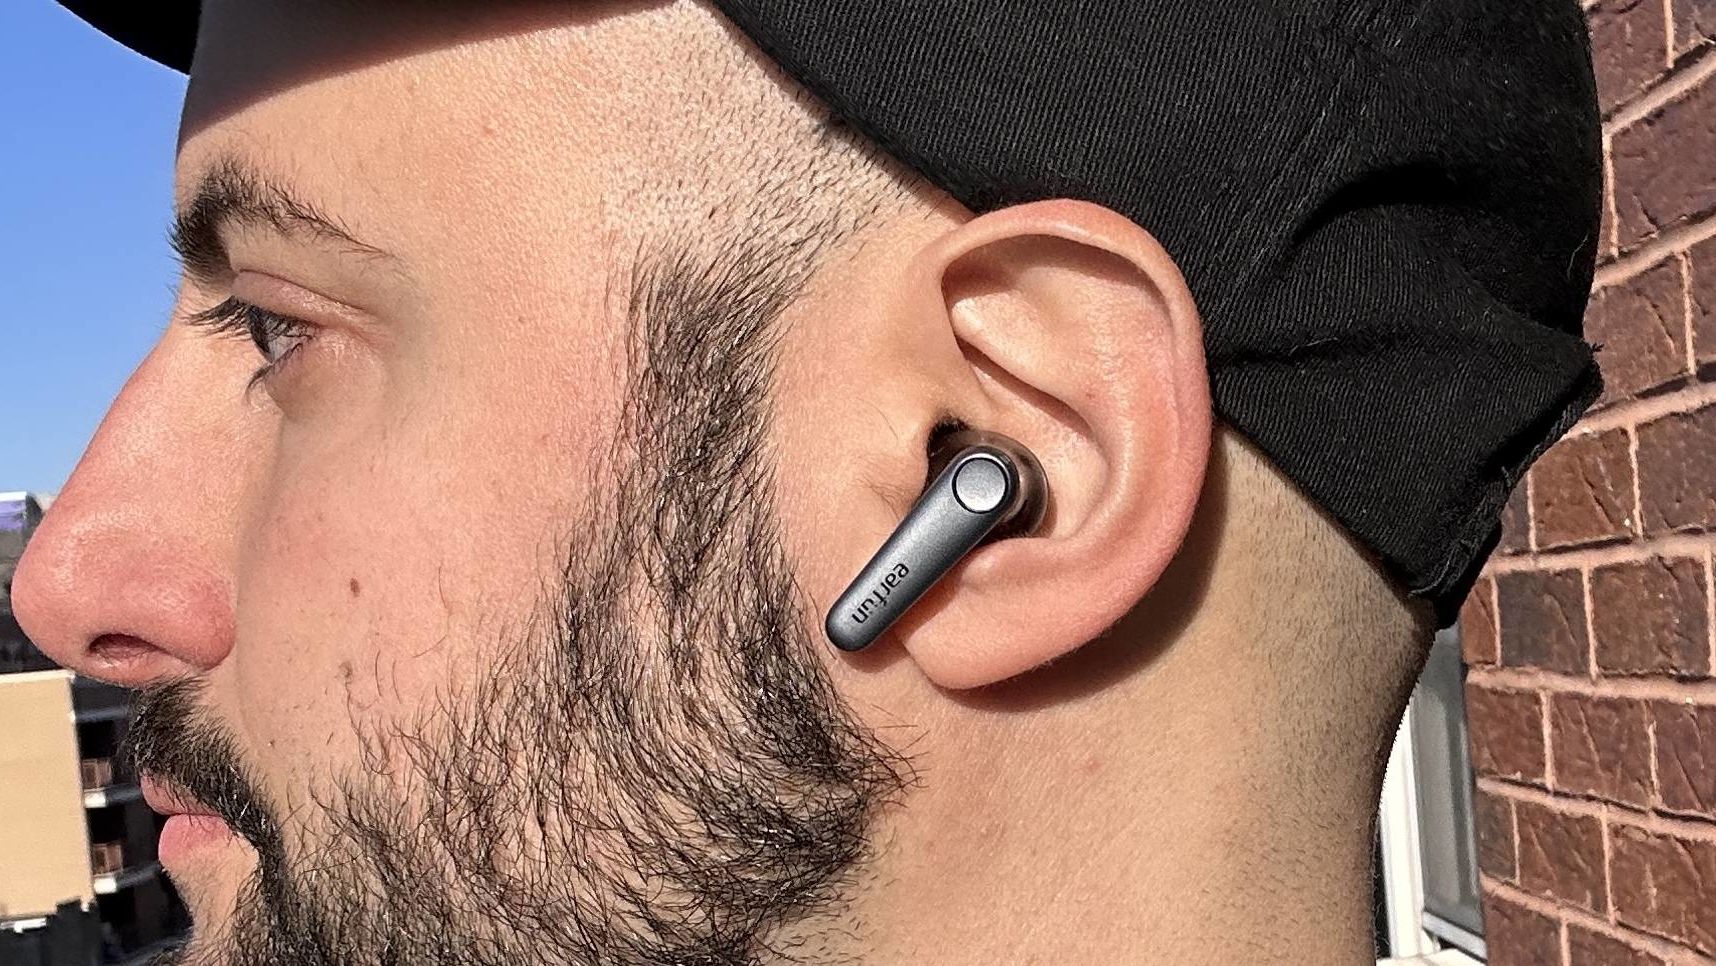 The EarFun Air 2 are the best-sounding $50 earbuds I’ve tested | CNN  Underscored